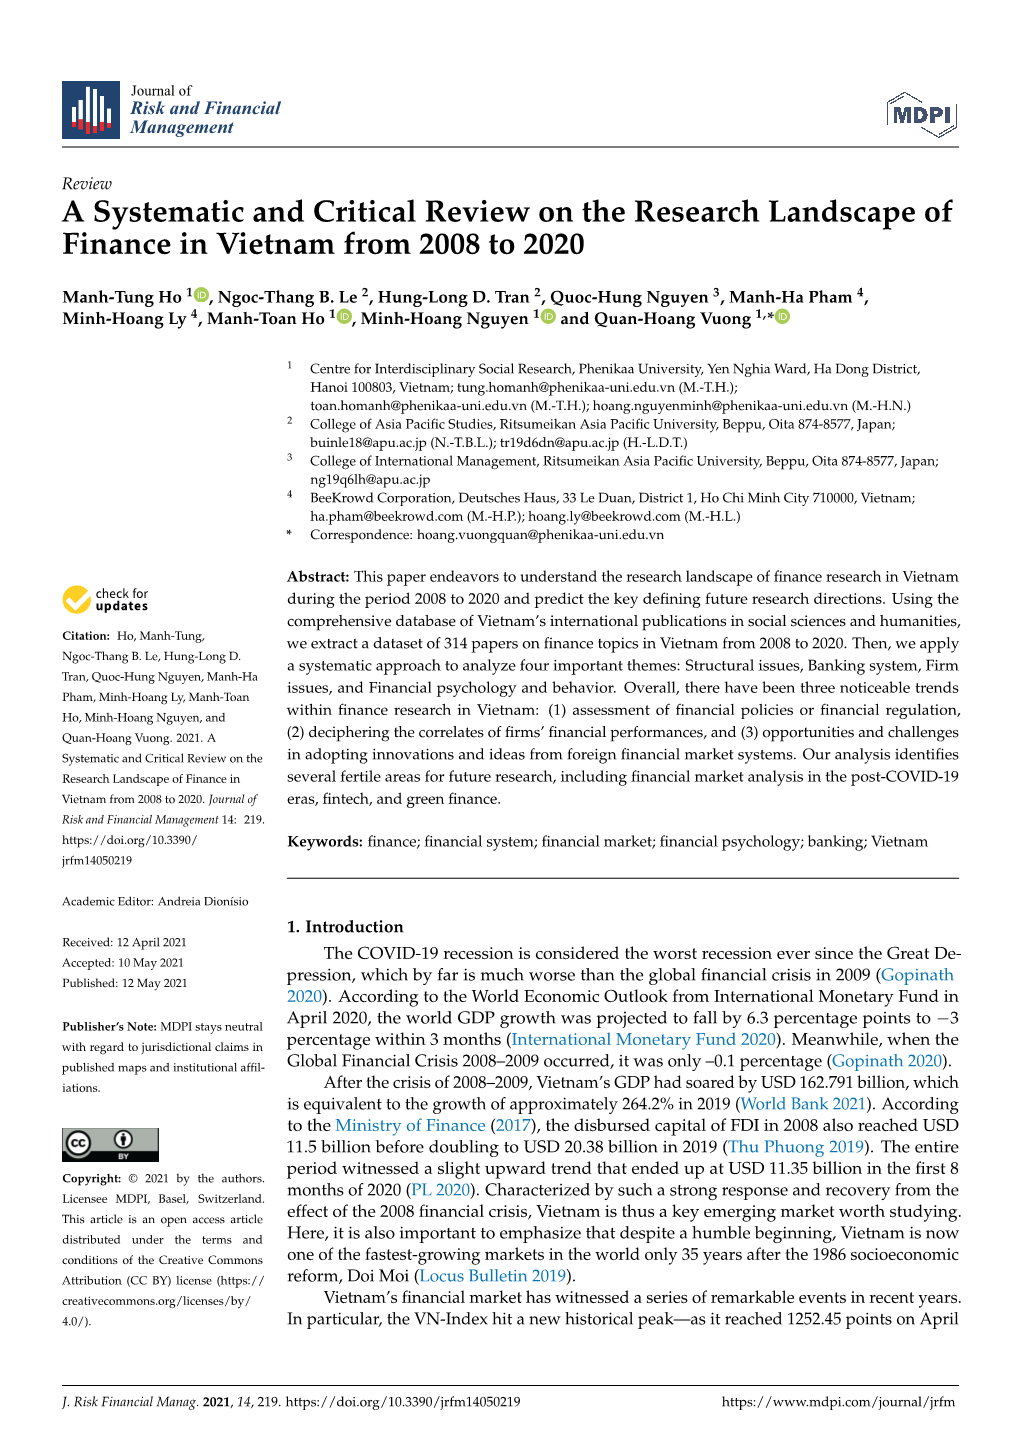 A Systematic and Critical Review on the Research Landscape of Finance in Vietnam from 2008 to 2020